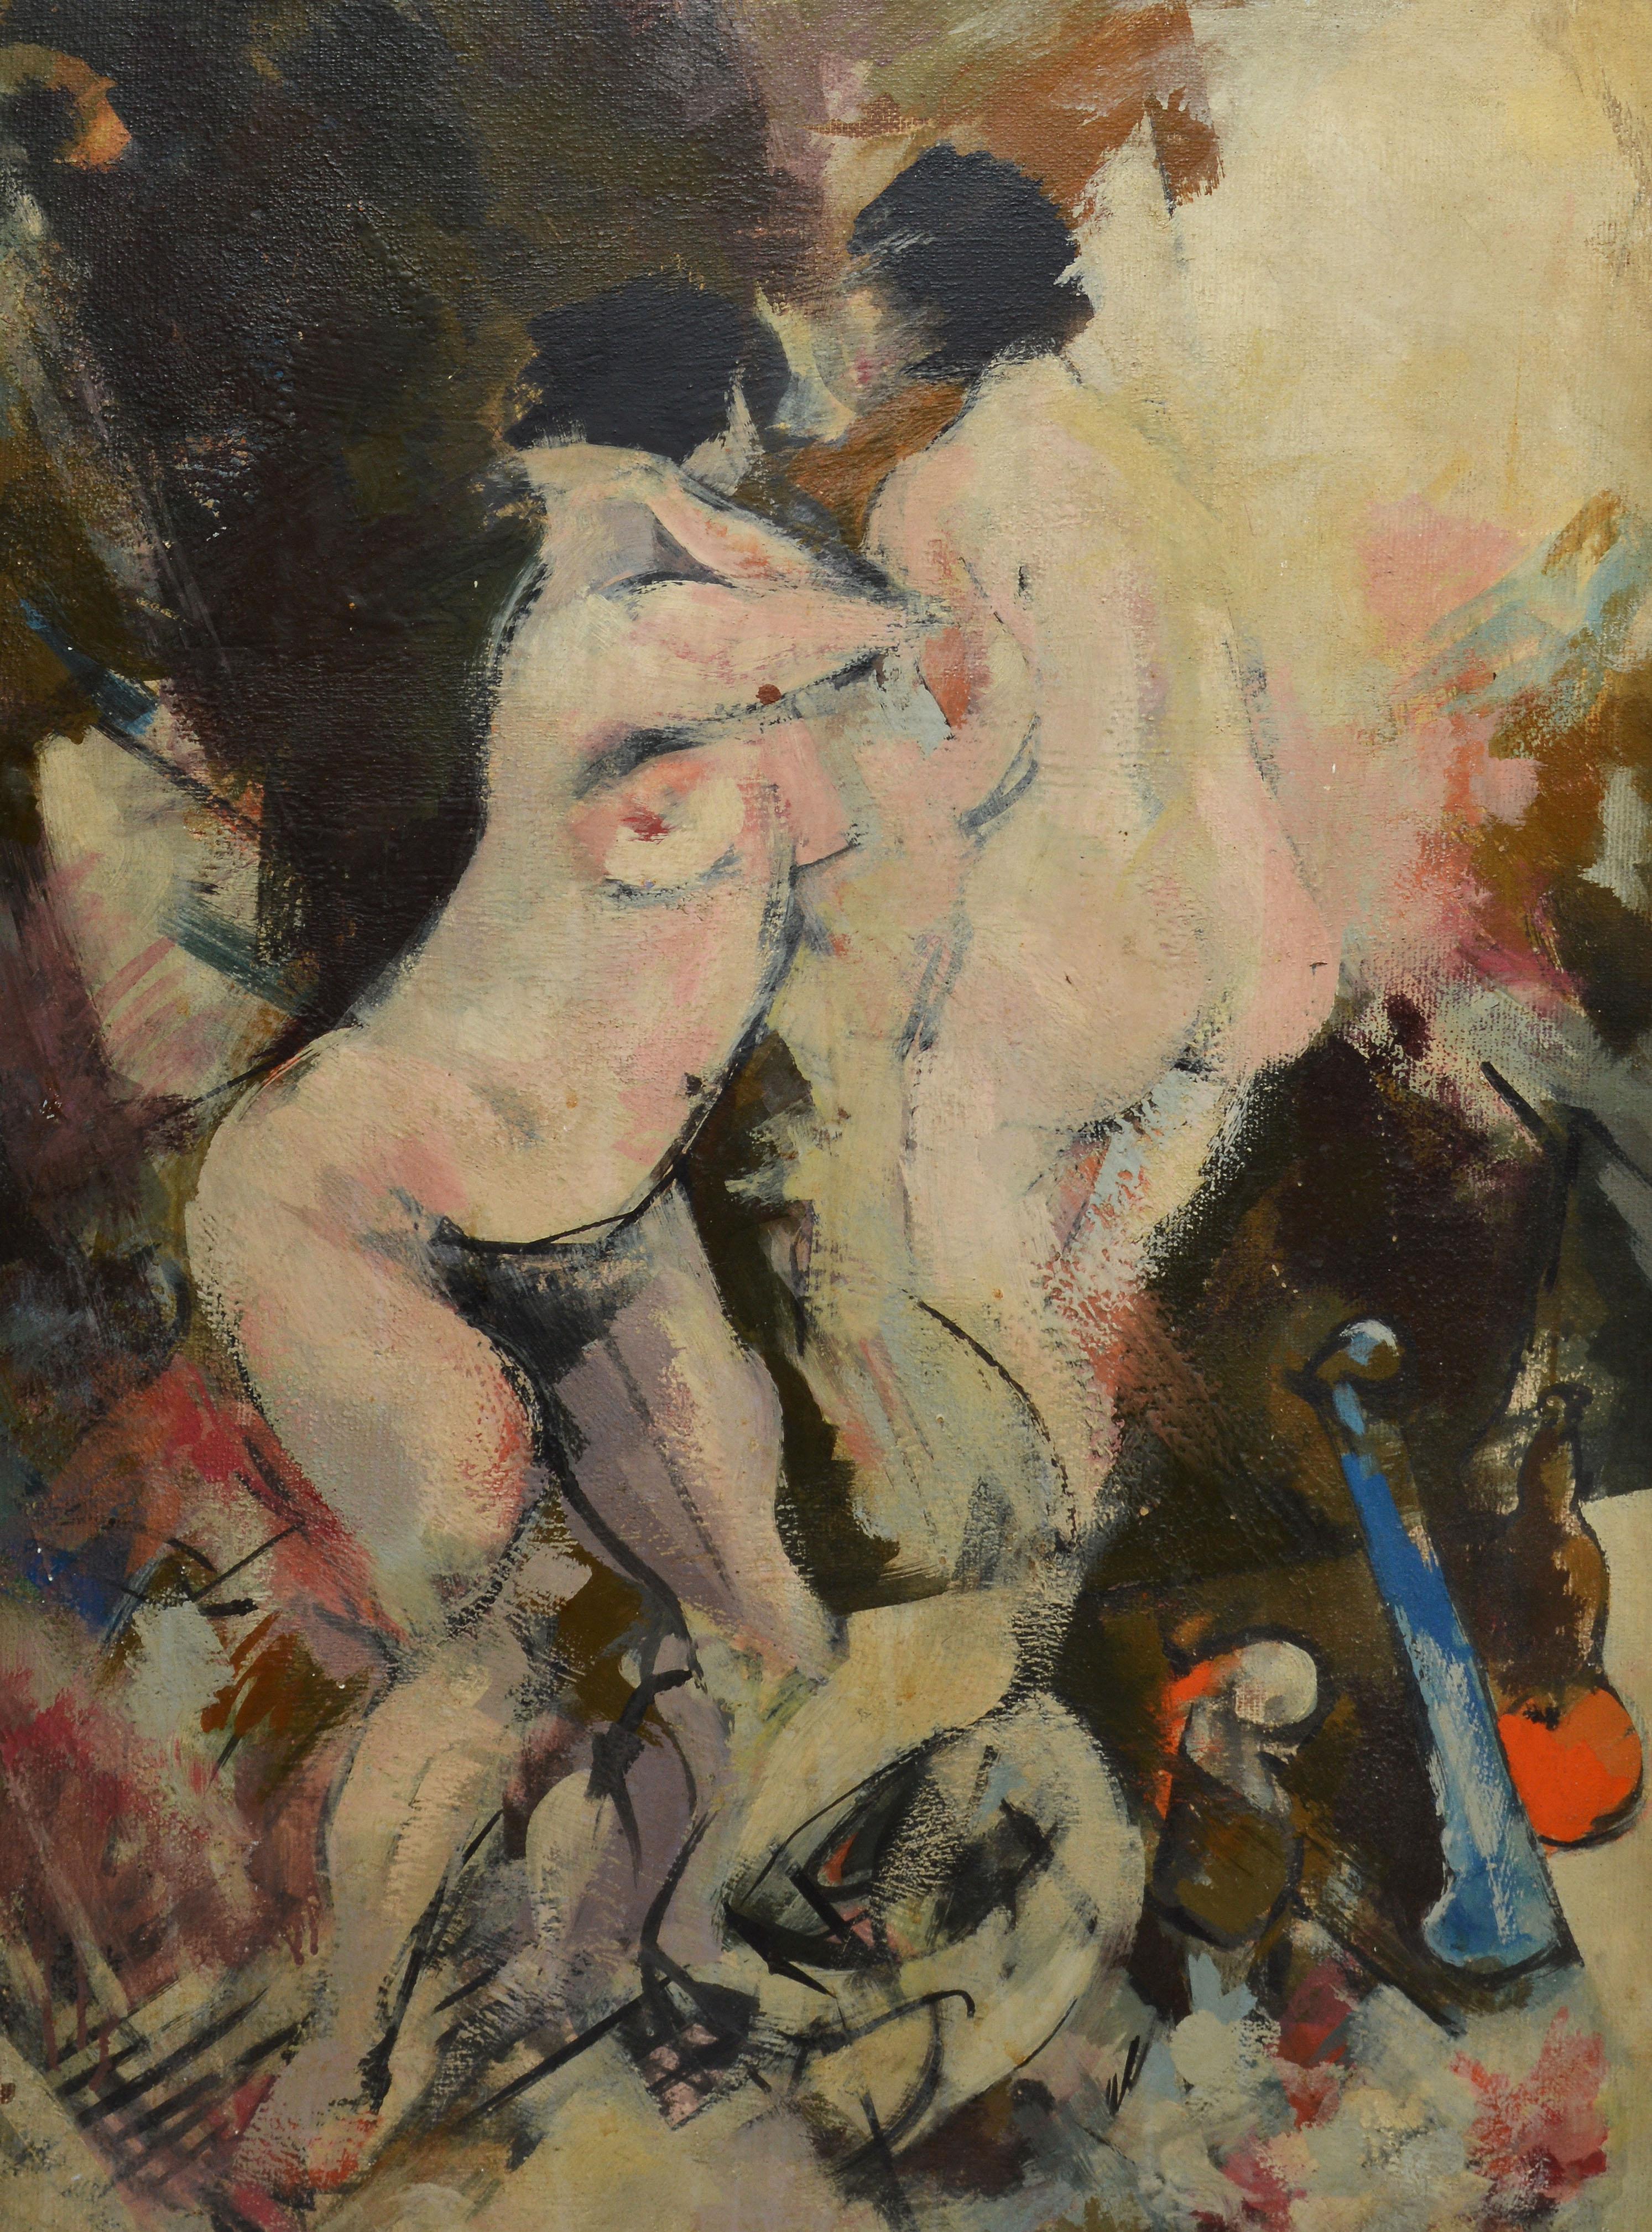 Modernist abstracted view of two nude women by Michael Wright  (born 1931).  Oil on board, circa 1960.  Signed lower right.  Displayed in a modernist wood frame.  Image size, 21